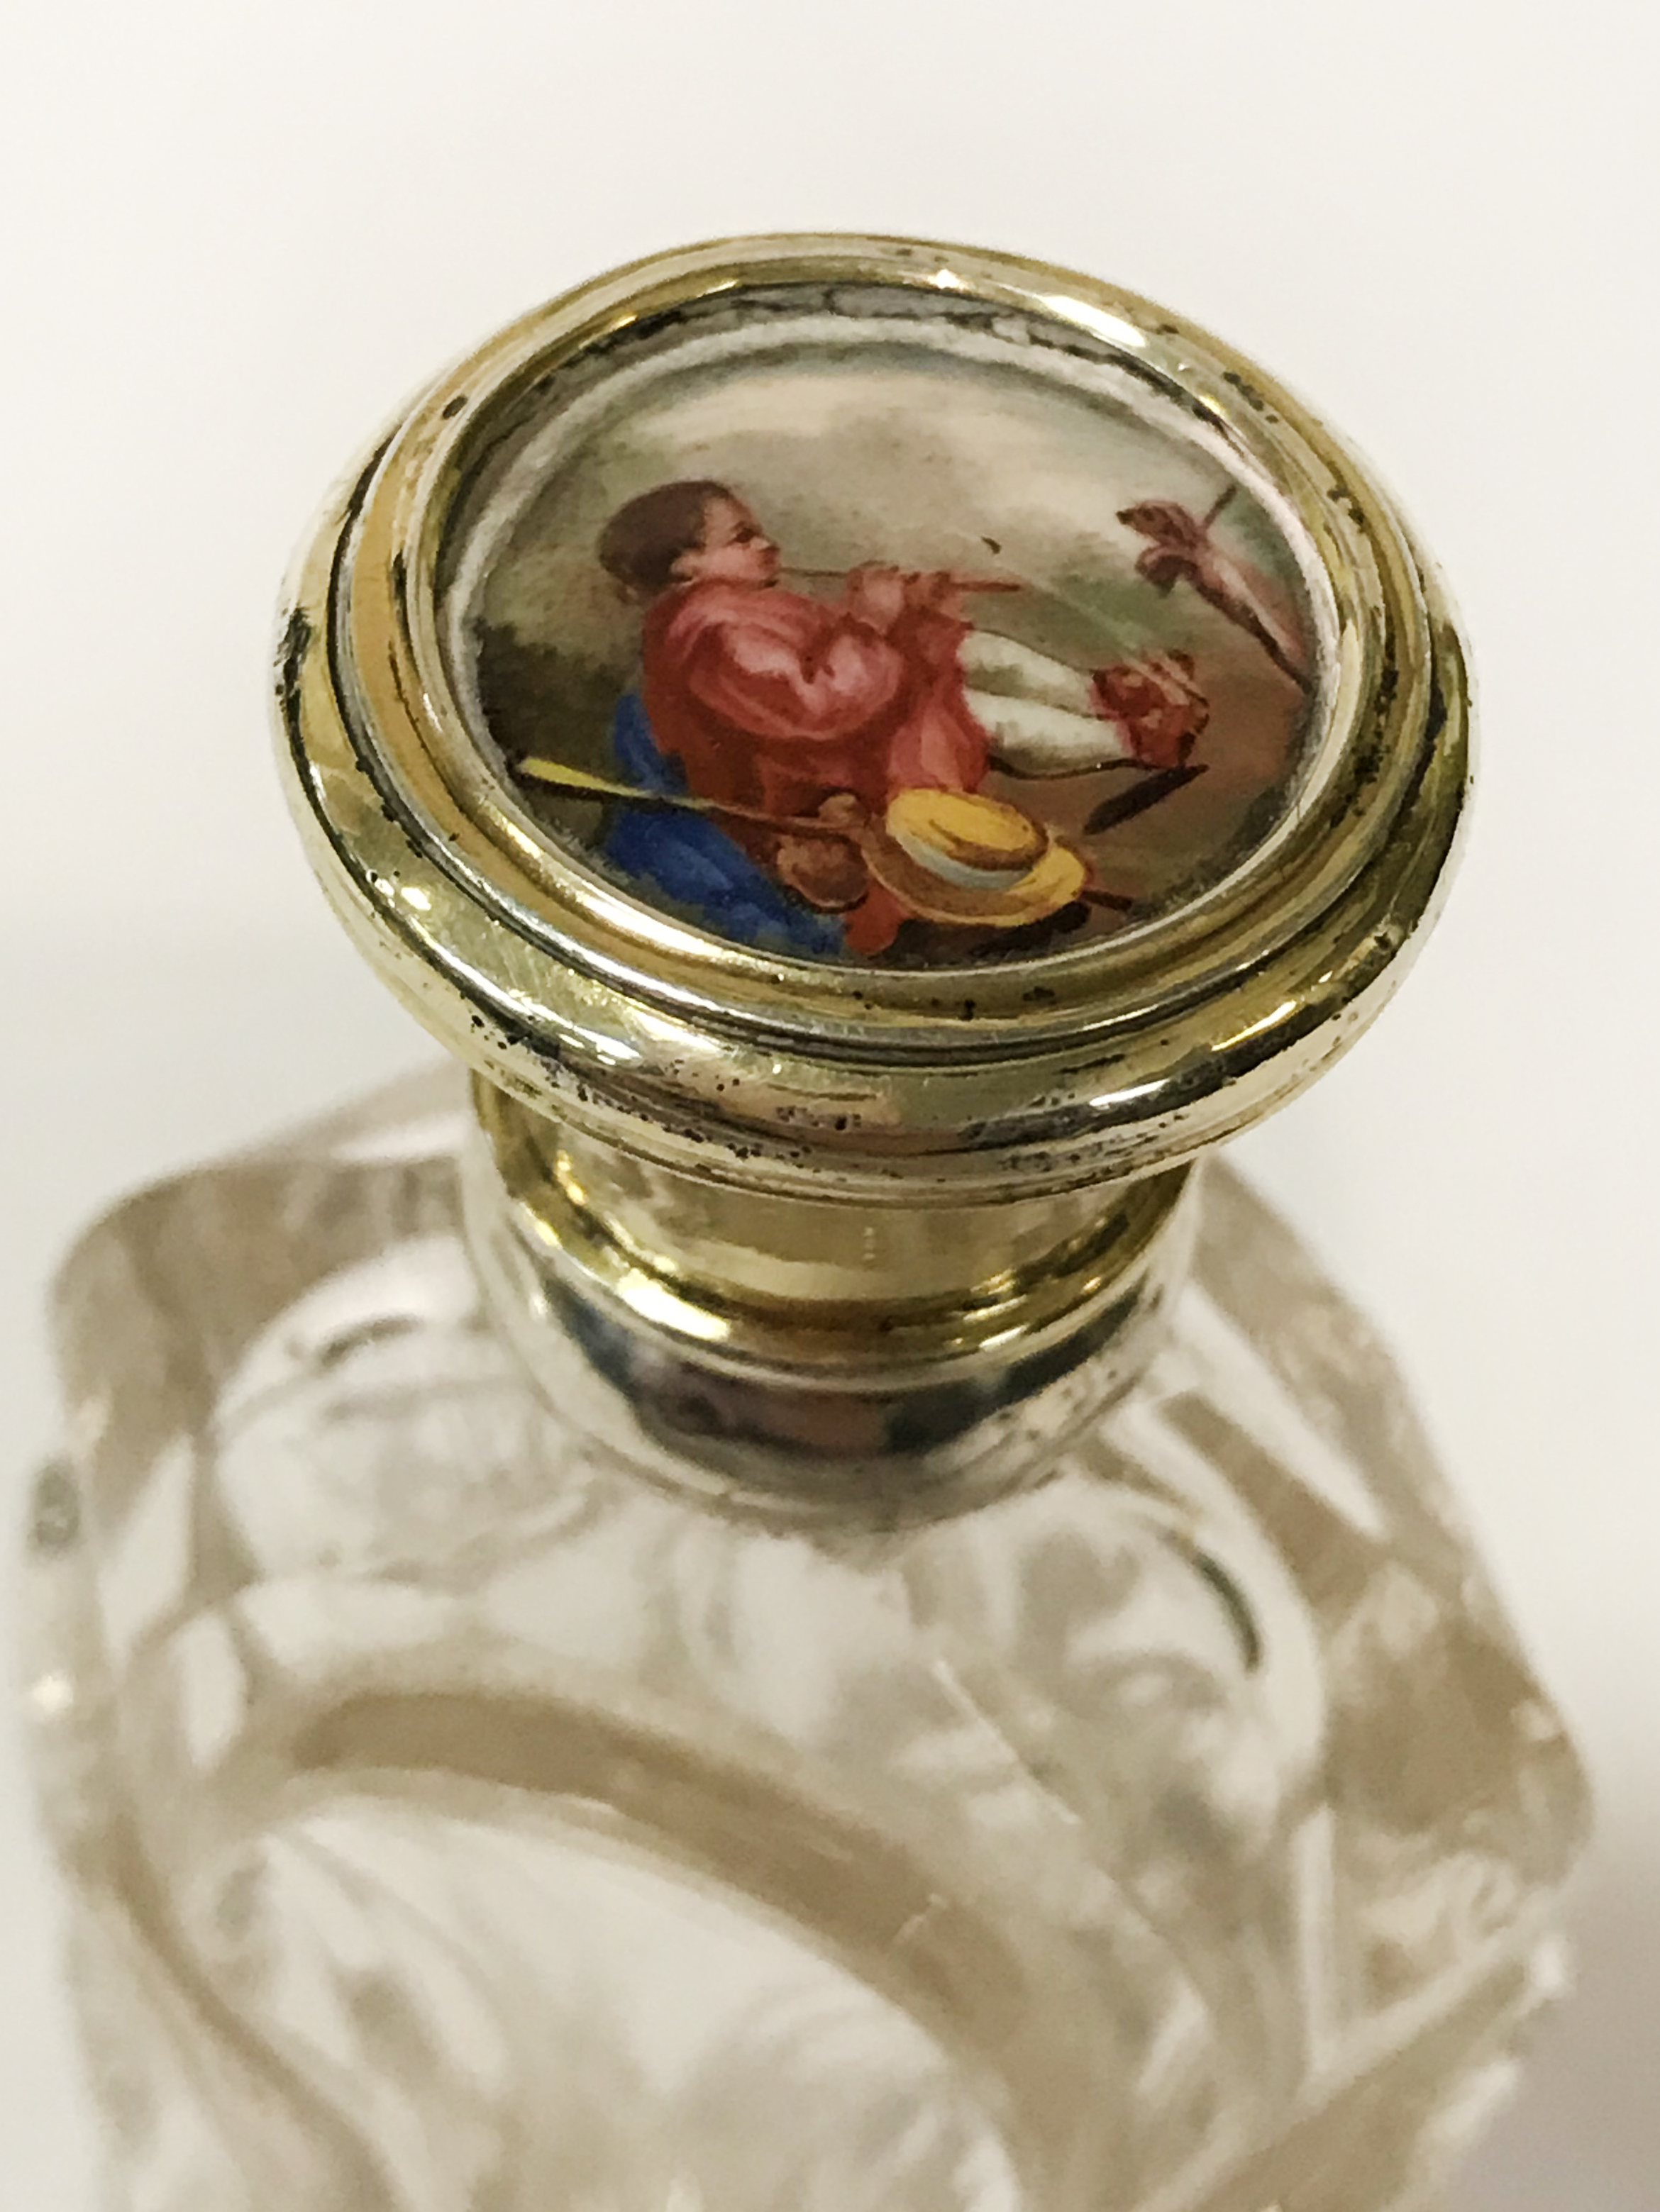 SILVER GILT PERFUME BOTTLE WITH HAND PAINTED MINIATURE & 1 OTHER - 8CMS & 10CMS - Image 2 of 2